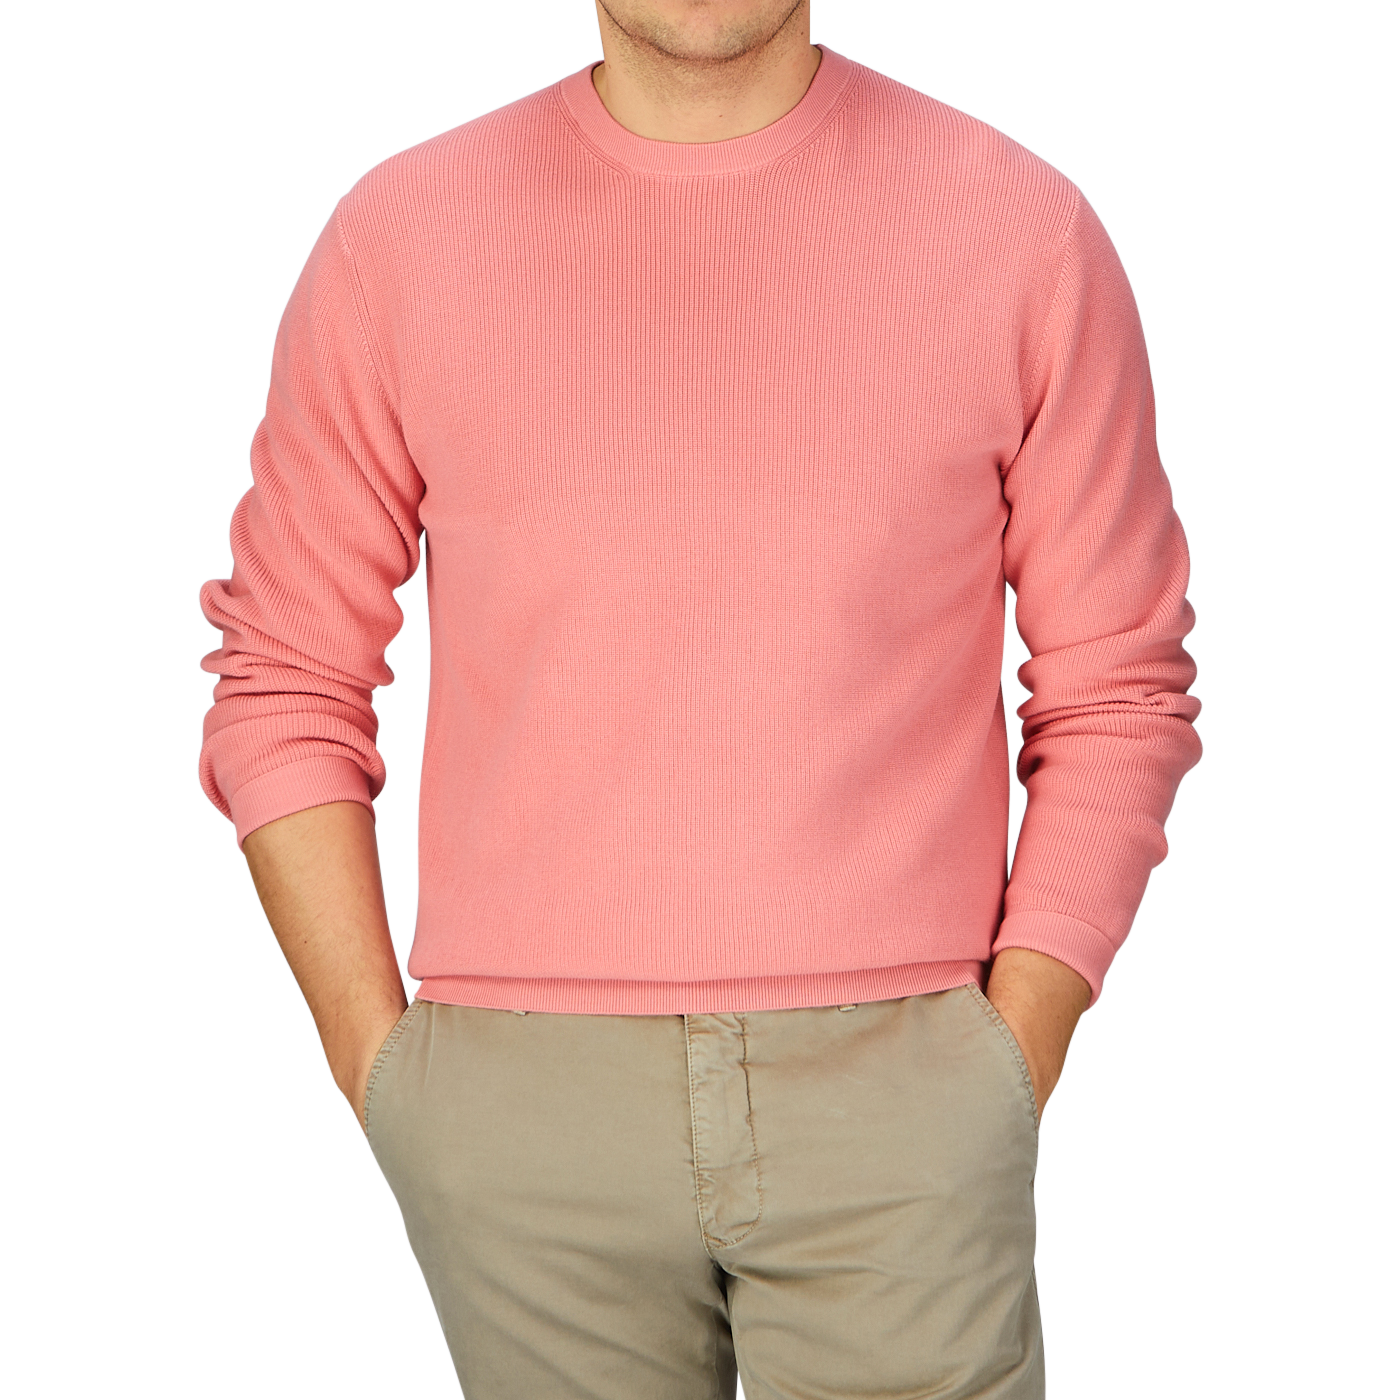 A man wearing a coral pink knitted cotton sweater from Aspesi and khaki pants.